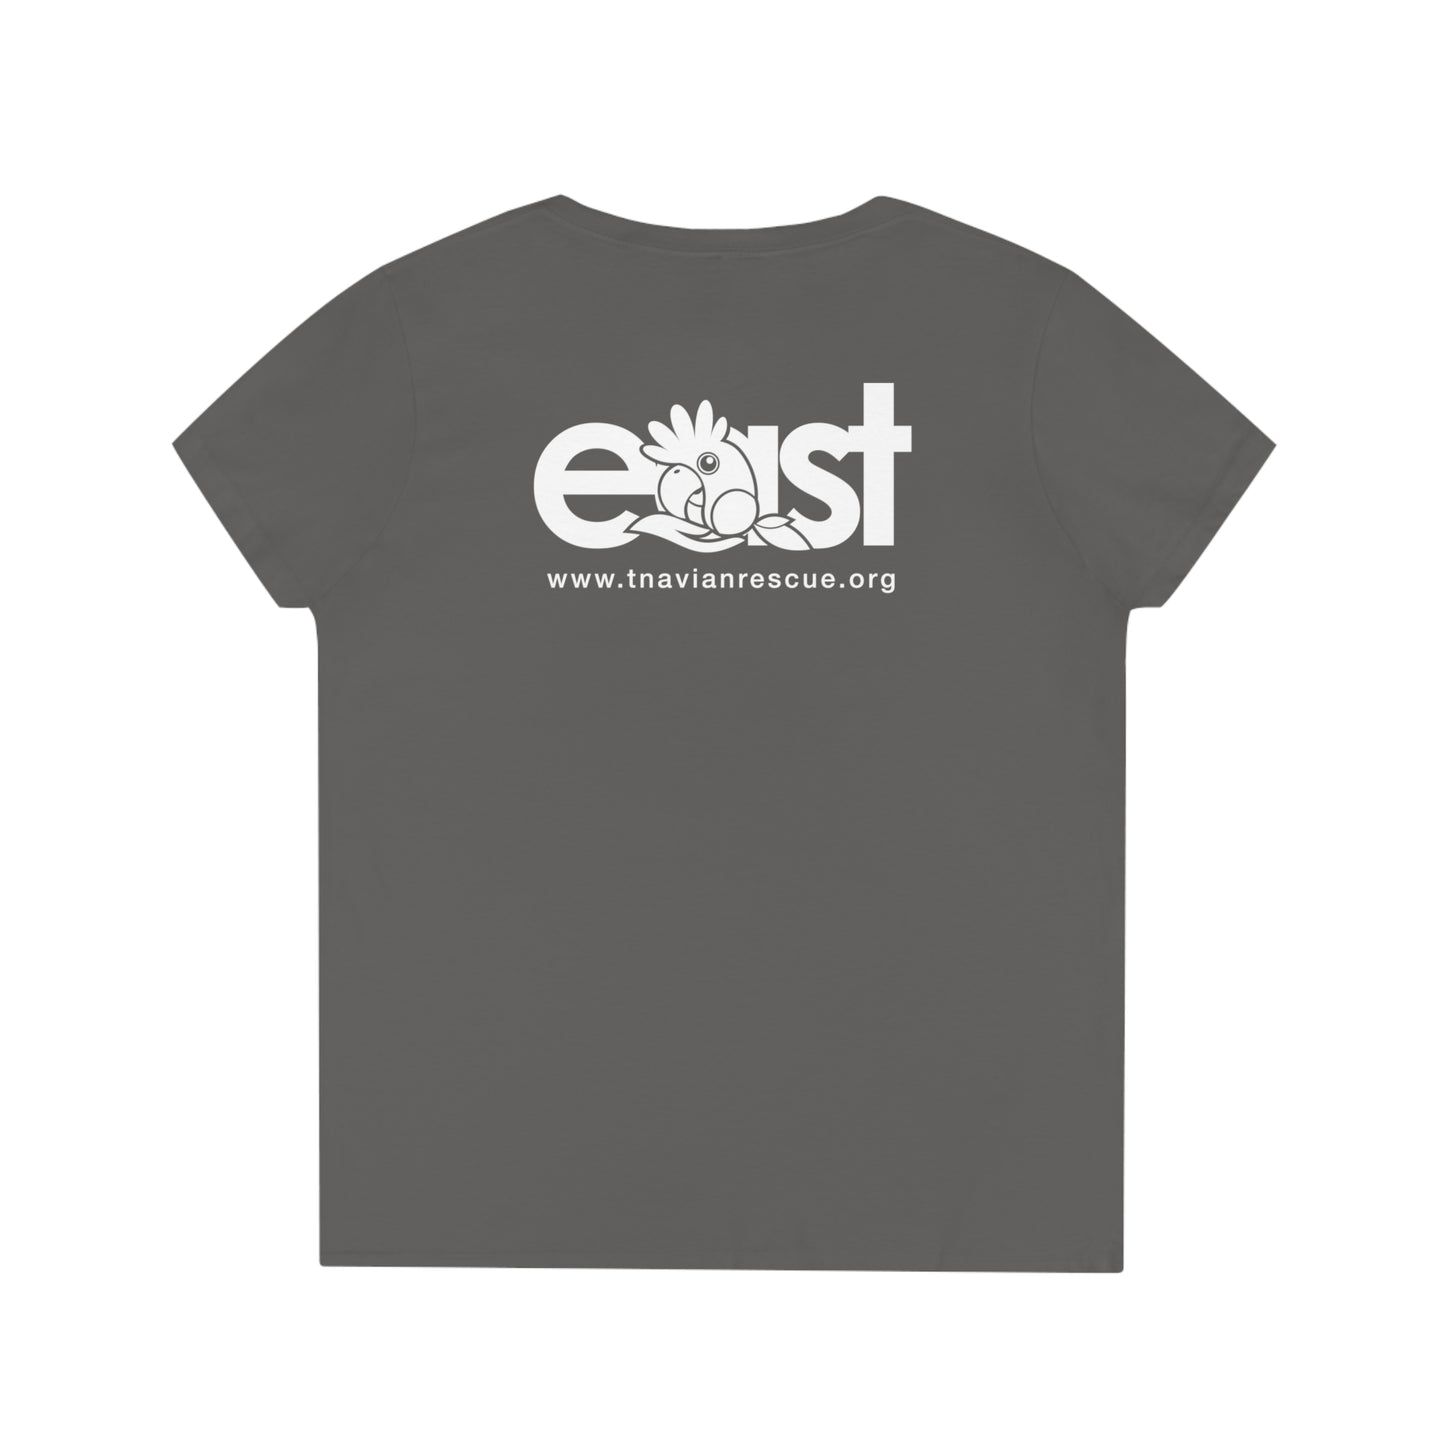 Ladies' EAST African Grey V-Neck T-Shirt